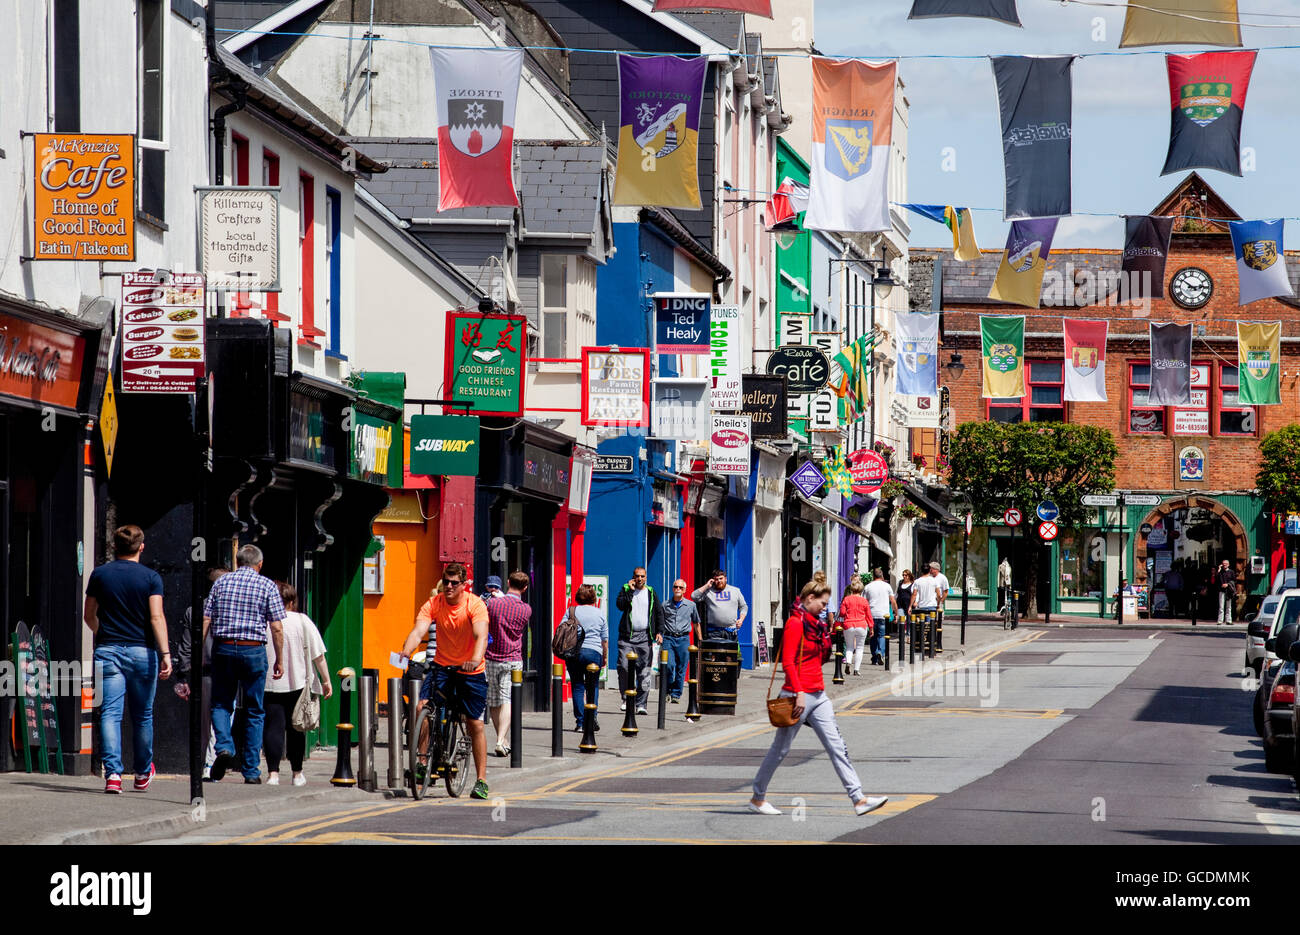 Pedestrians on the busy sidewalk with colourful buildings and banners with crests hanging over the street; Killarney, County Kerry, Ireland Stock Photo